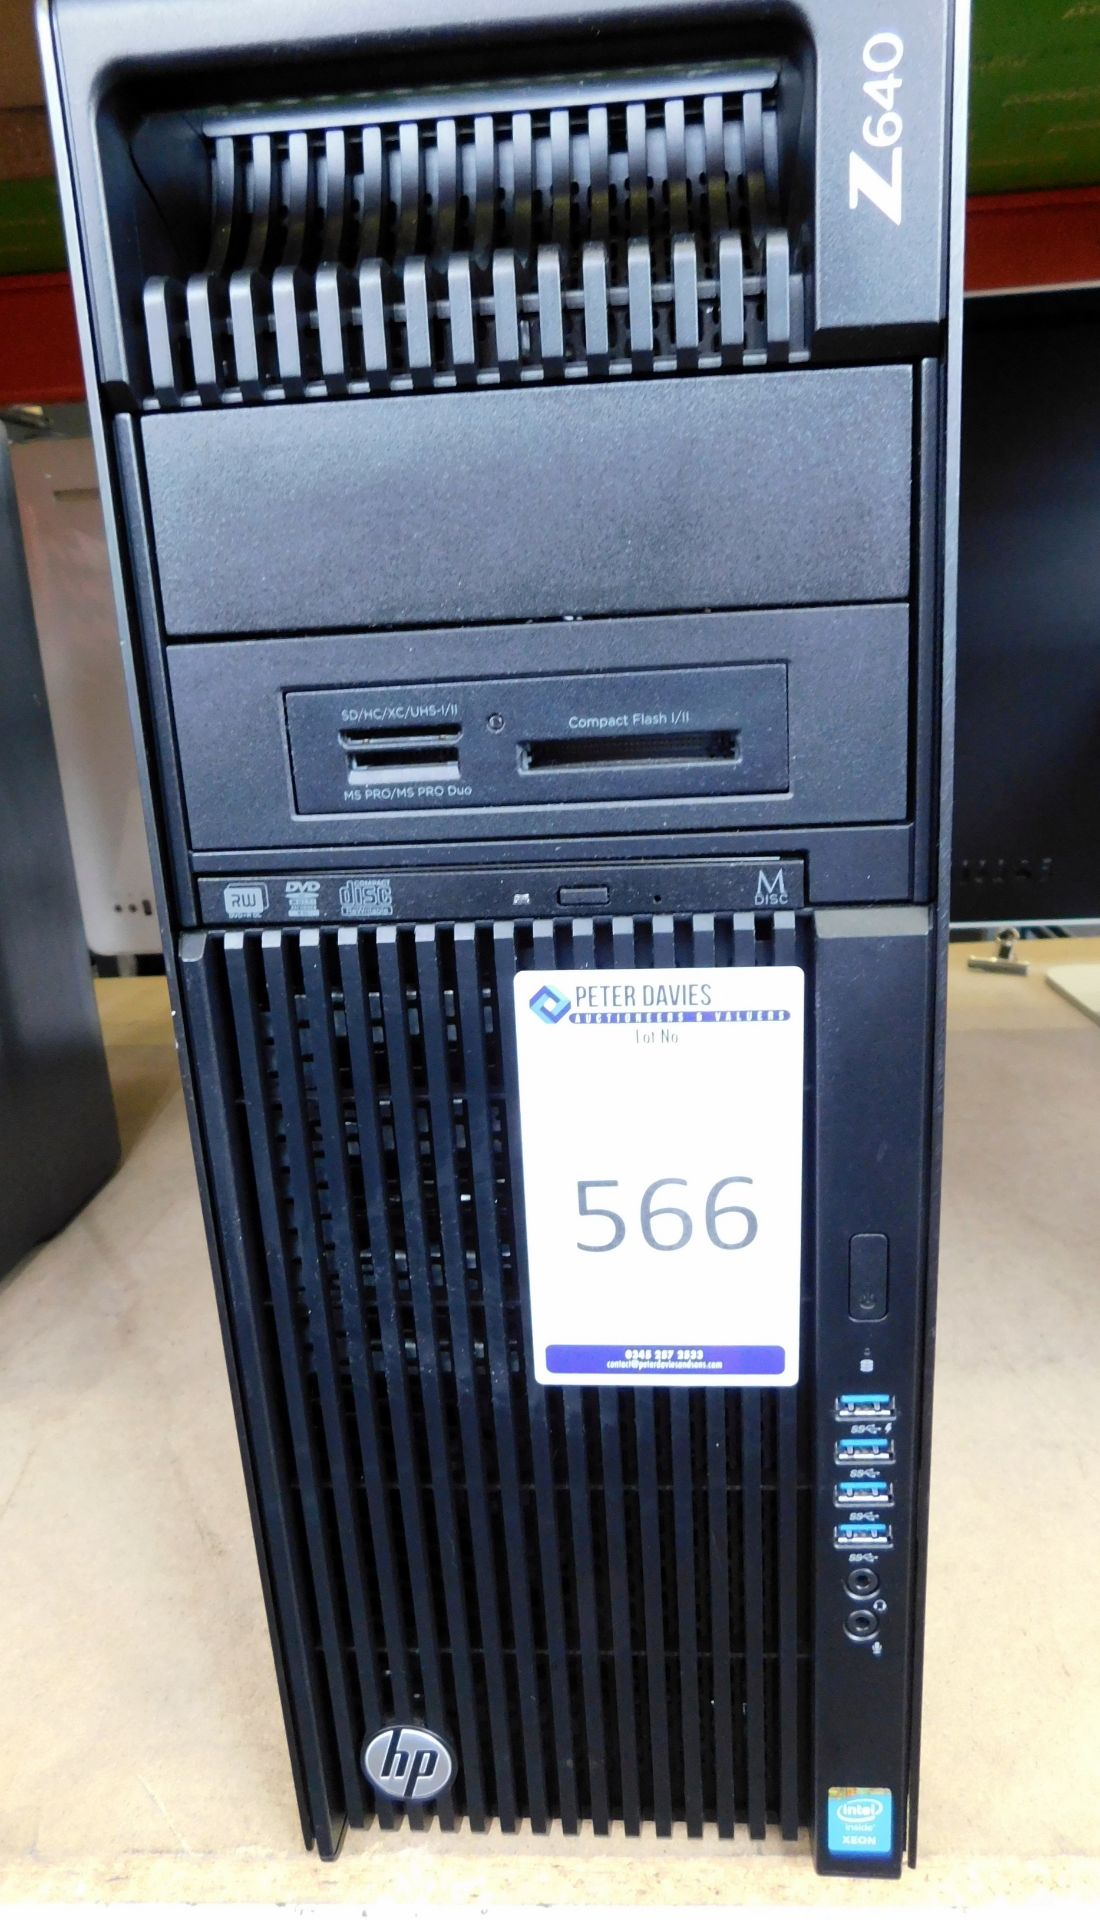 HP Z640Xeon E5 2630 2.4ghz Tower Computer with 32gb Ram, 1TB HDD (Located Stockport – Viewing by